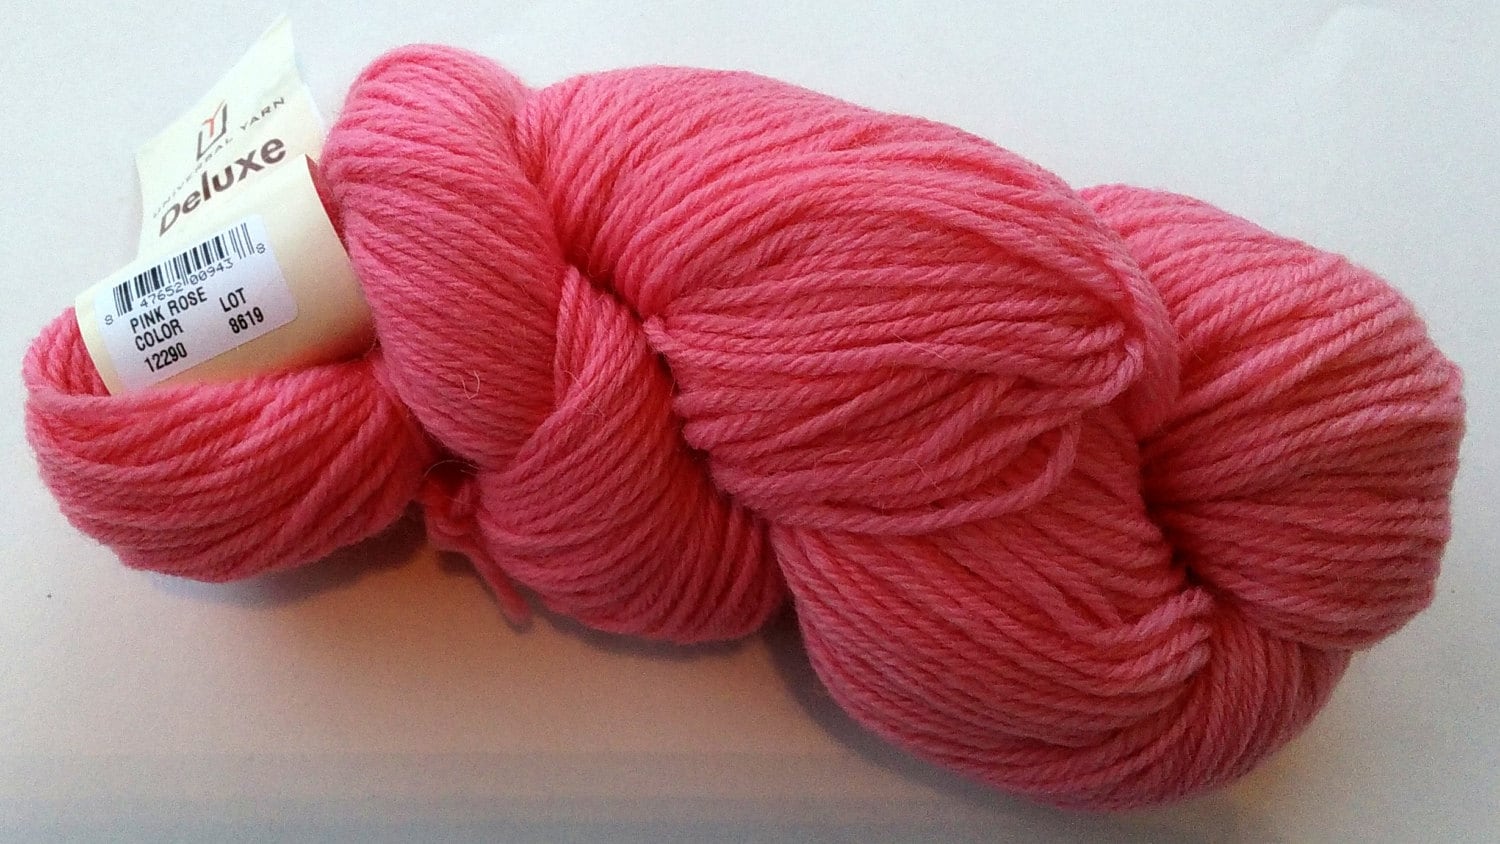 Universal Yarn Deluxe Worsted 100% Wool Pink Rose Color 12290 | Etsy